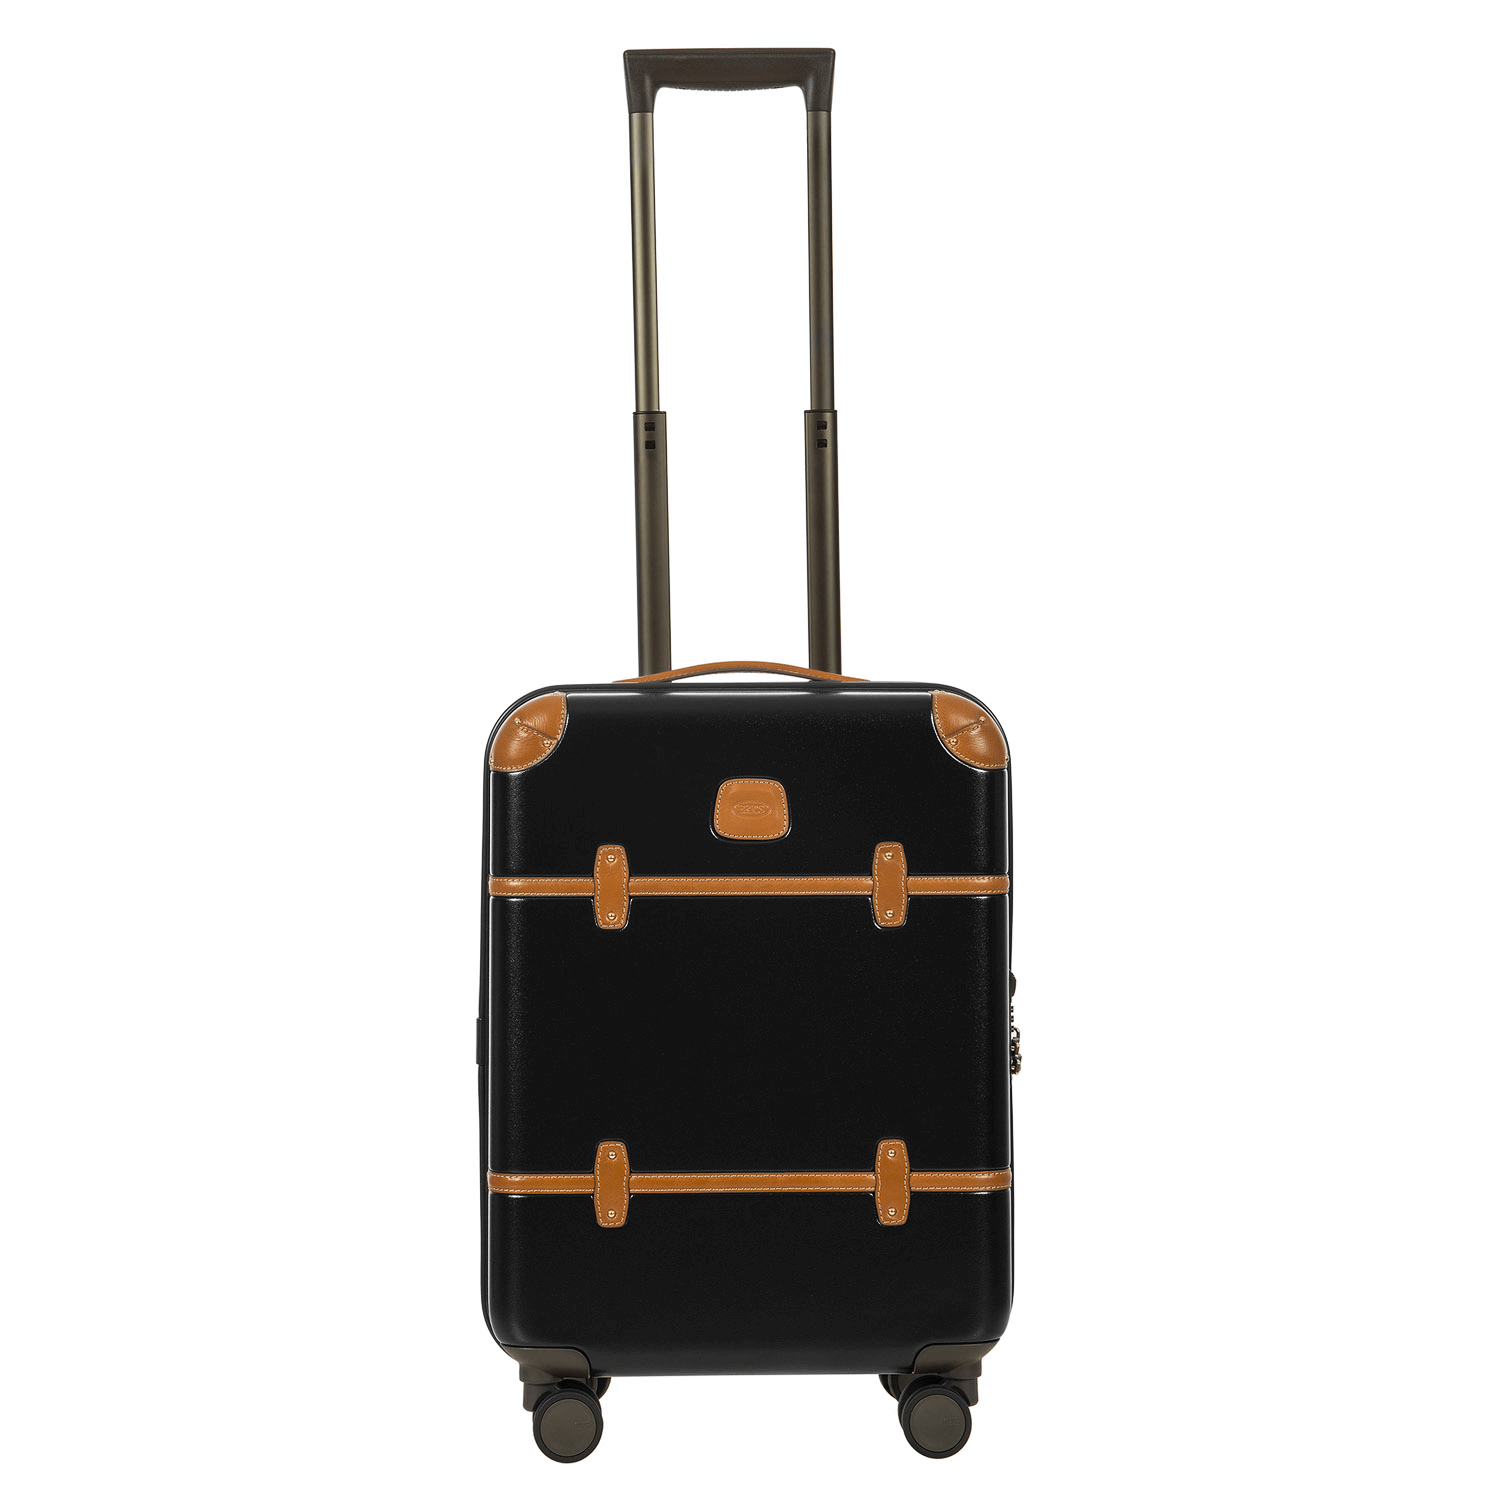 Bric’s Carry-On Luggage: A Business Traveler's Best Friend